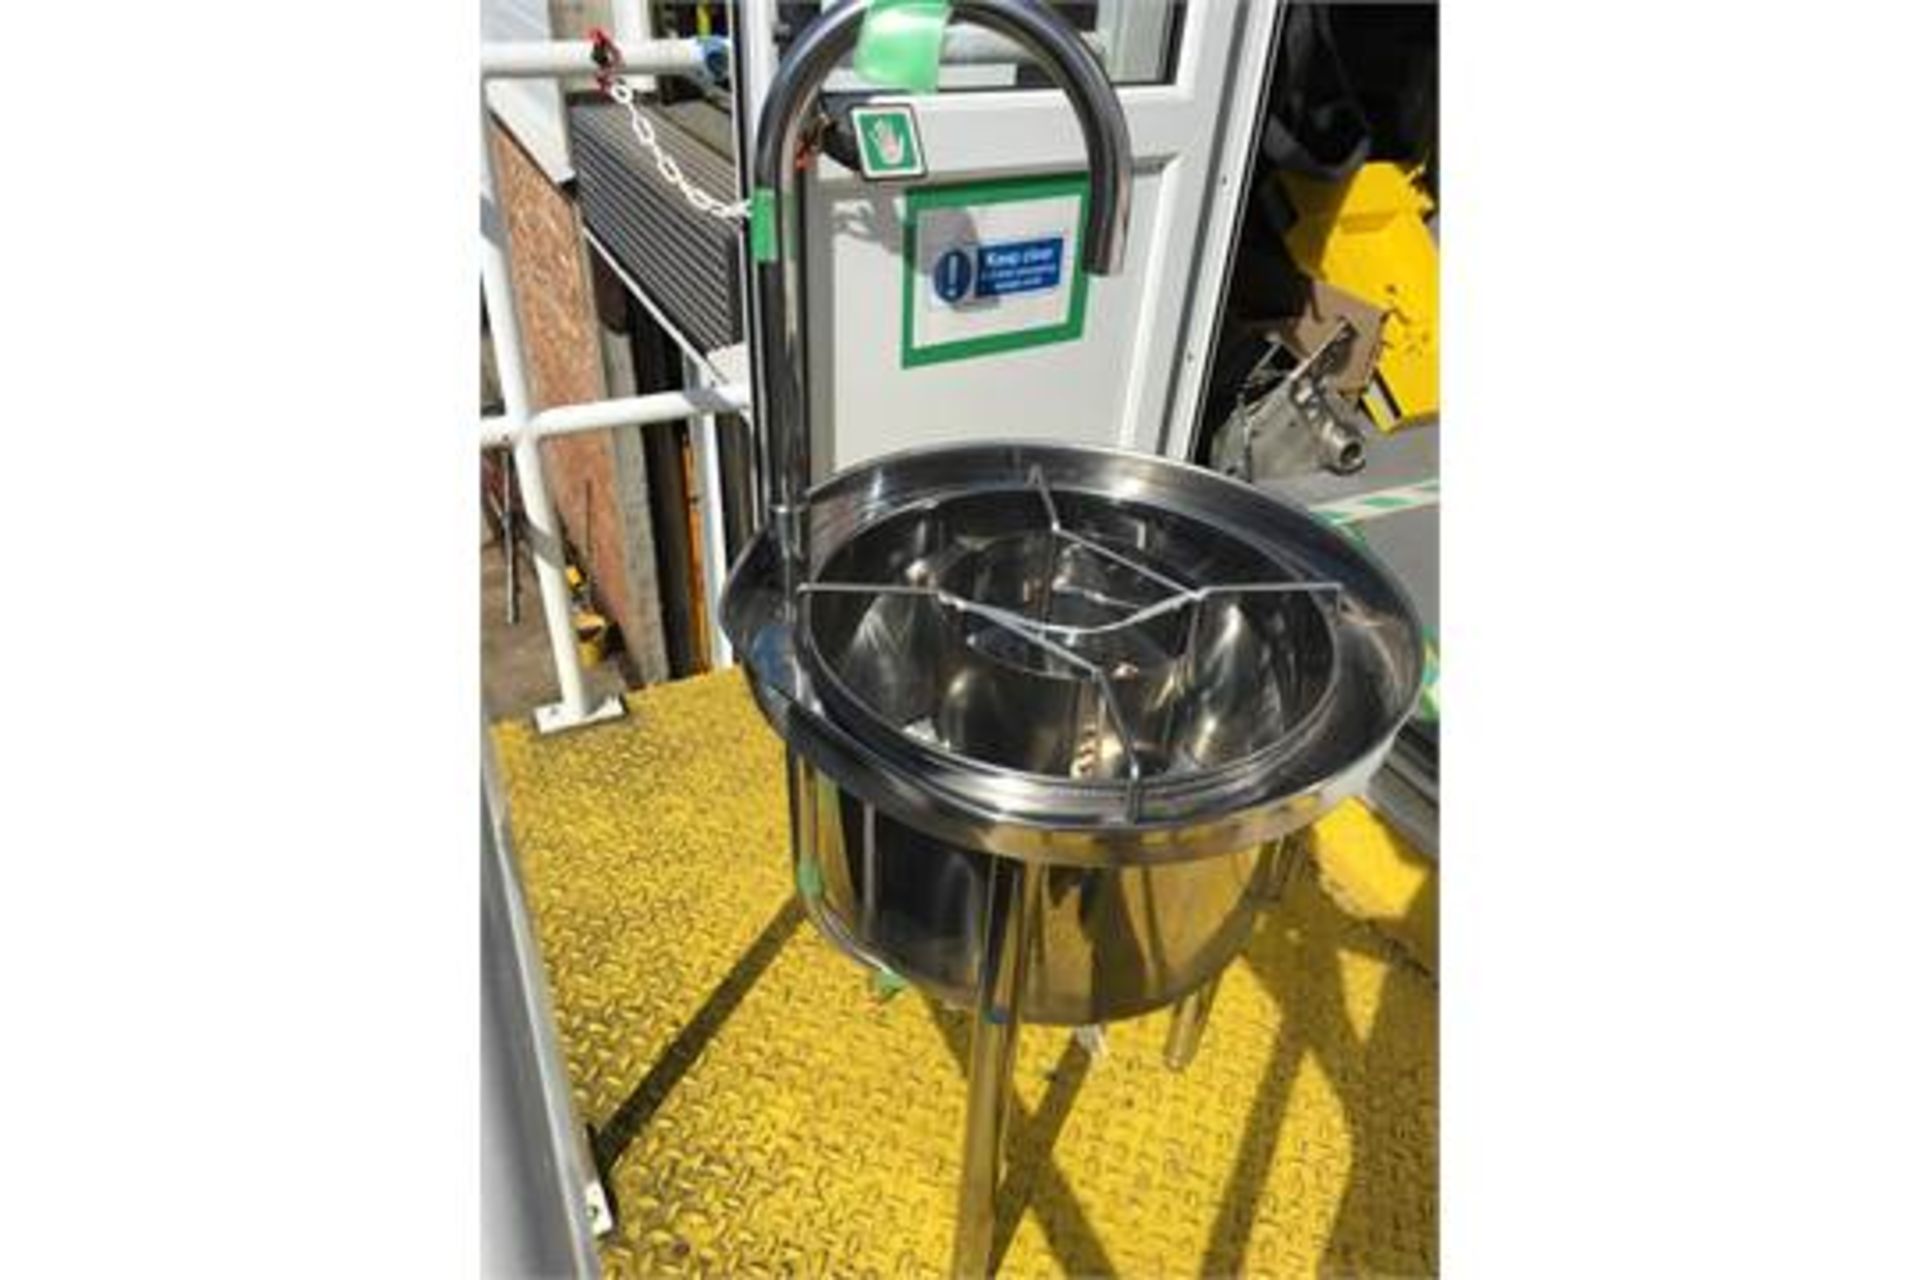 Brand New 22Kg Commercial Rice Washer, Fujimax Model FRW22W - Image 4 of 5